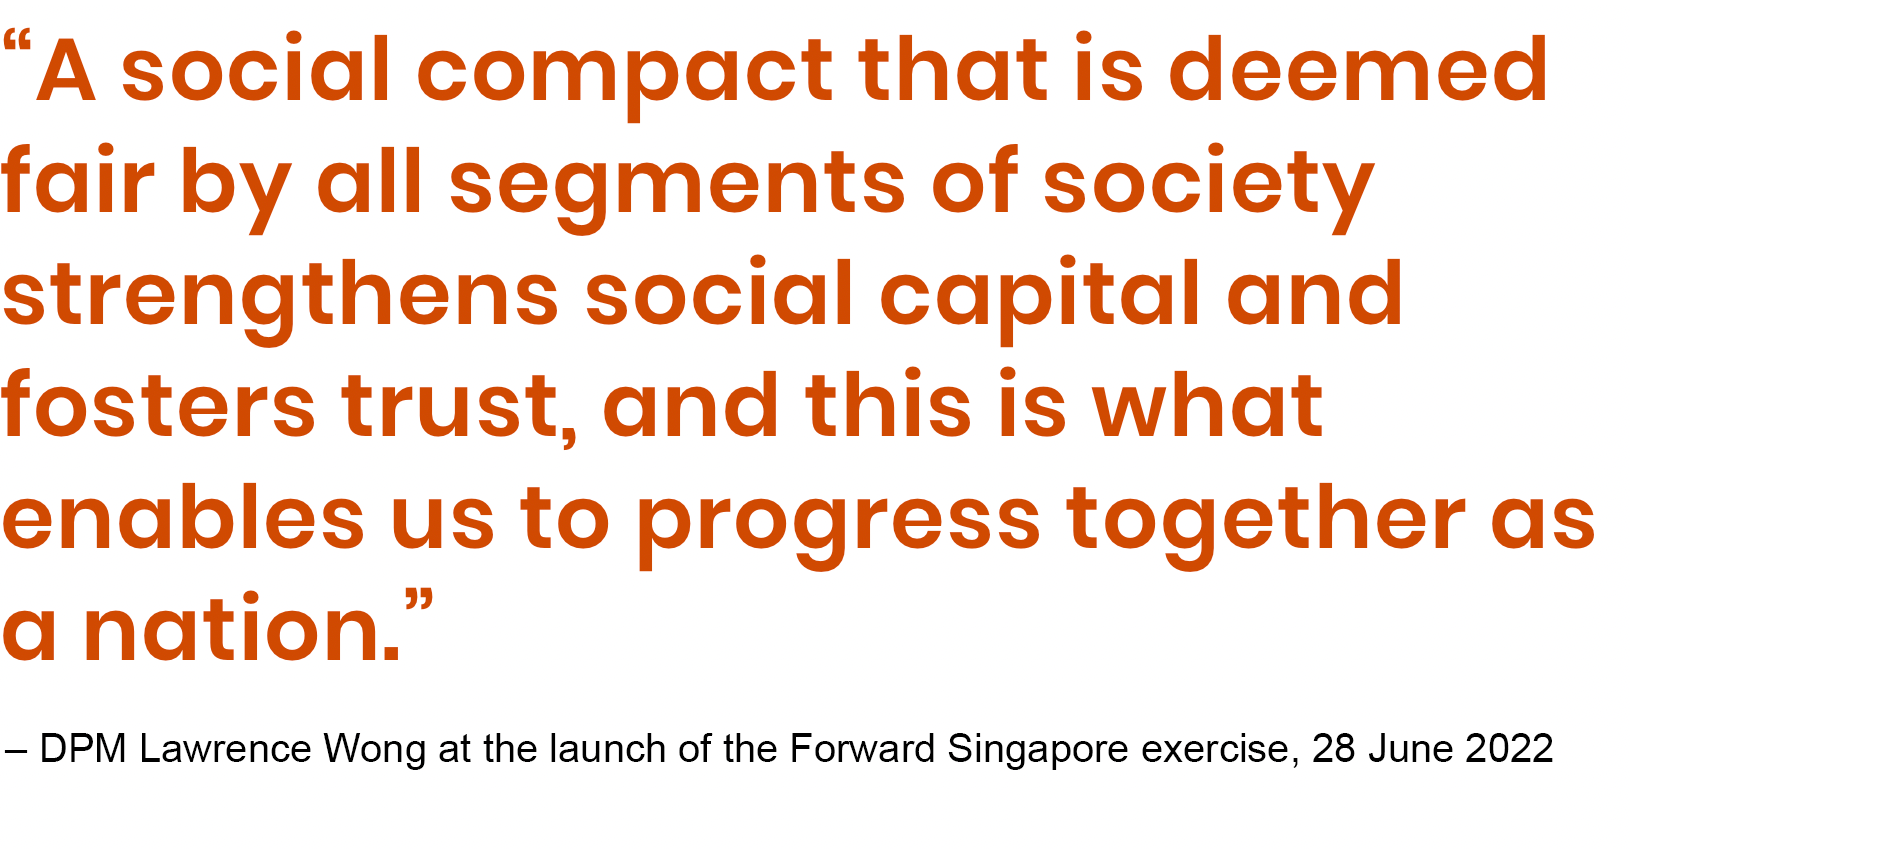 “A social compact that is deemed fair by all segments of society strengthens social capital and fosters trust, and this is what enables us to progress together as a nation.”